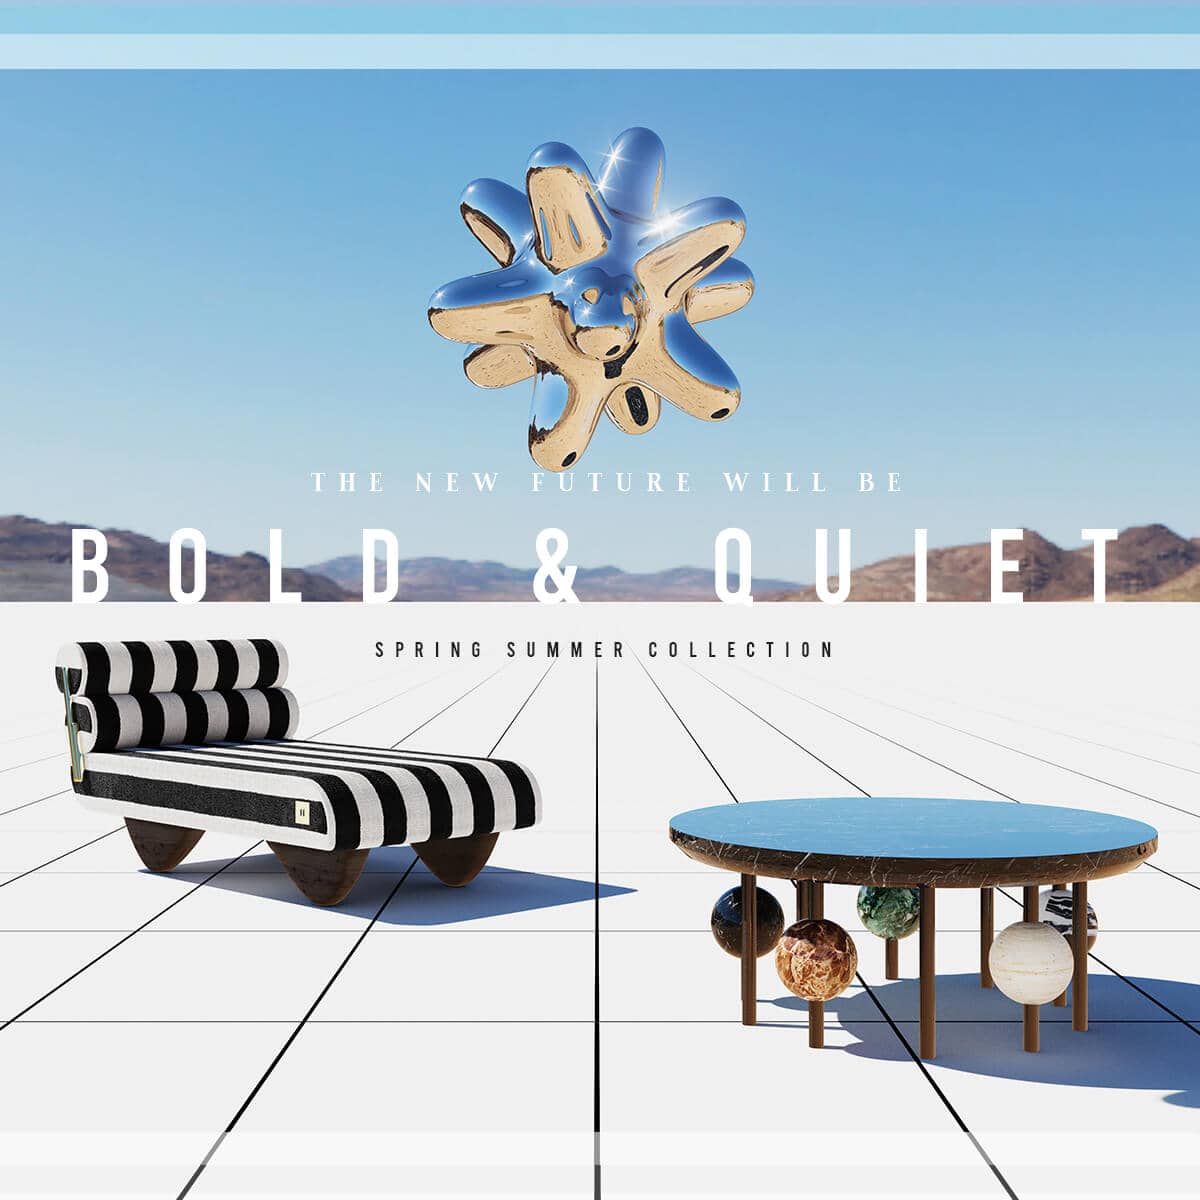 Bold & Quiet - Modern Outdoor Furniture Collection